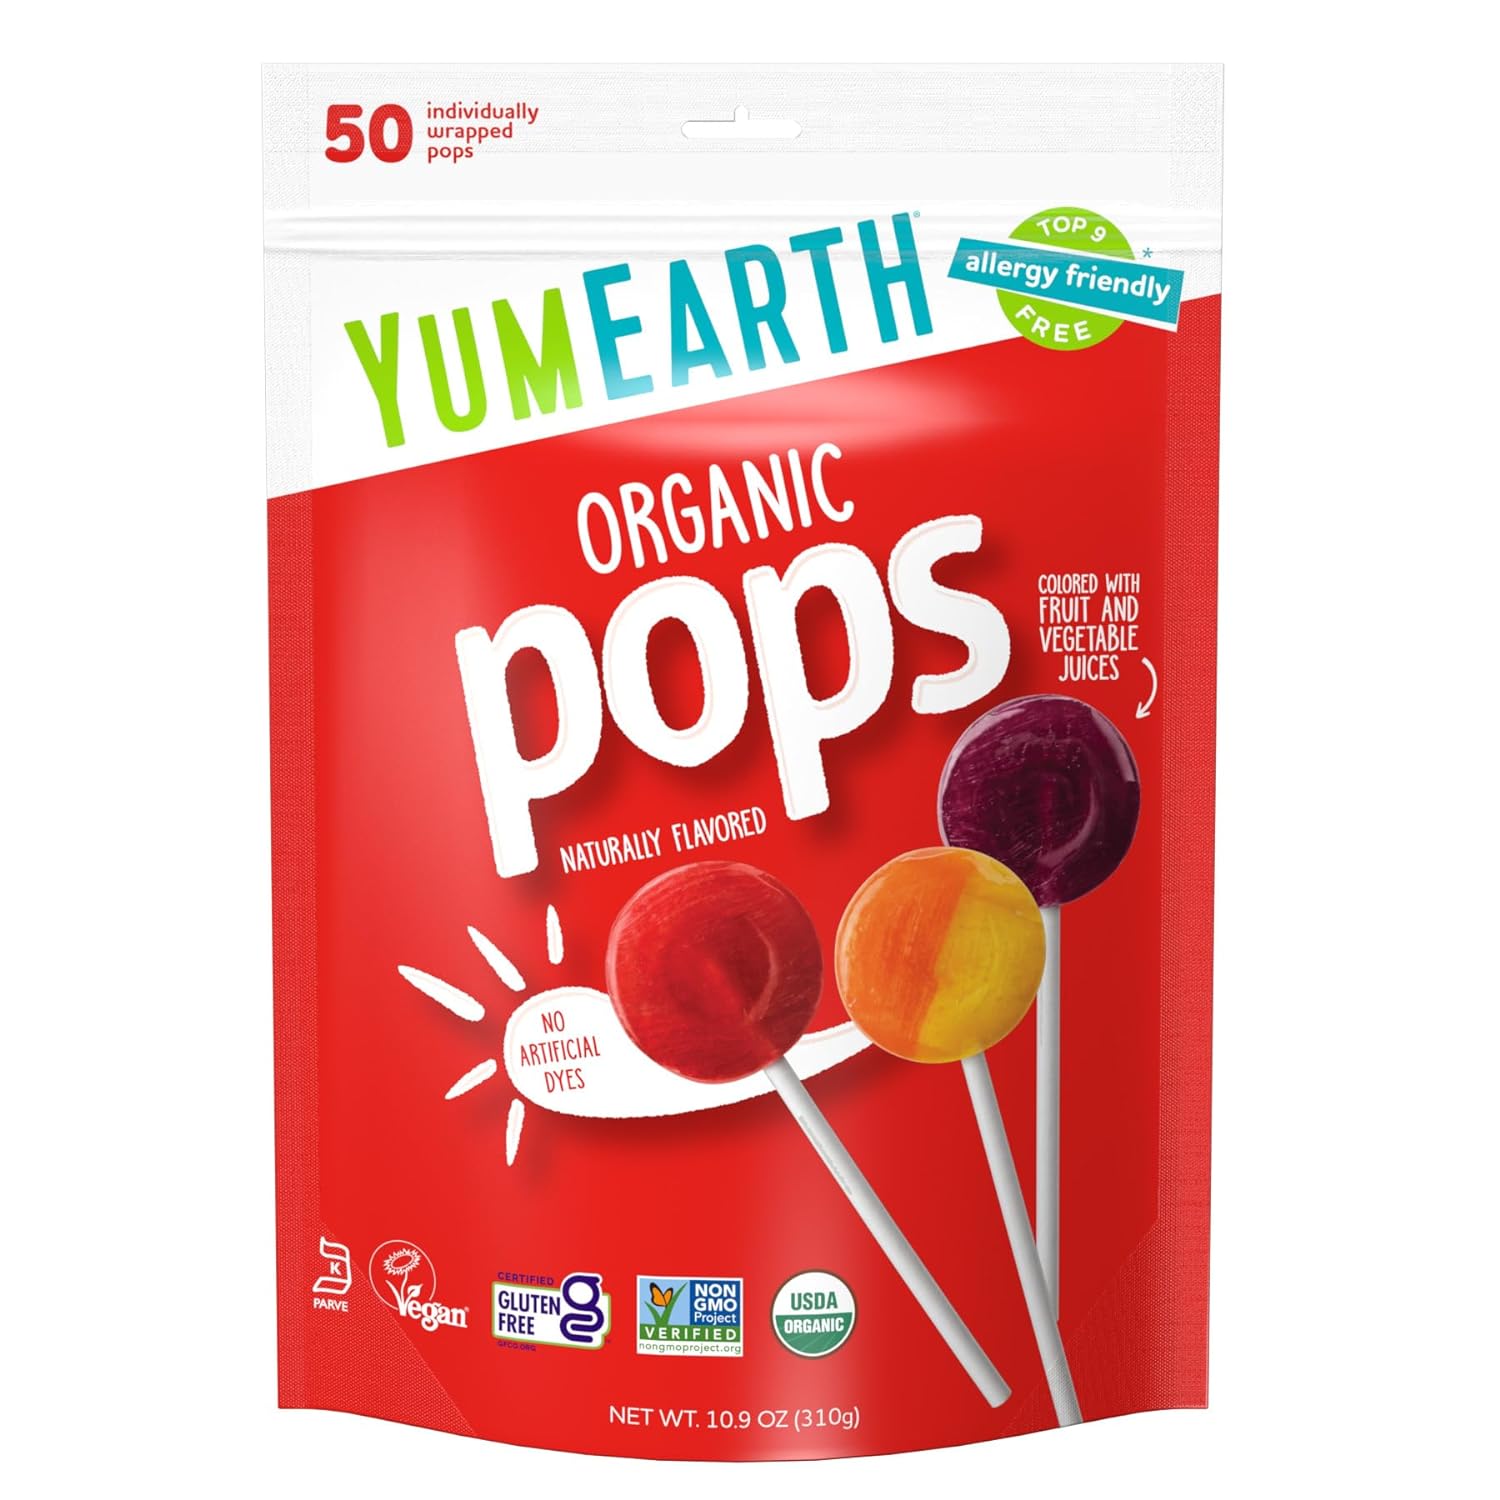 YumEarth Organic Pops Variety Pack, 50 Fruit Flavored Favorites Lollipops, Allergy Friendly, Gluten Free, Non-GMO, Vegan, No Artificial Flavors or Dyes